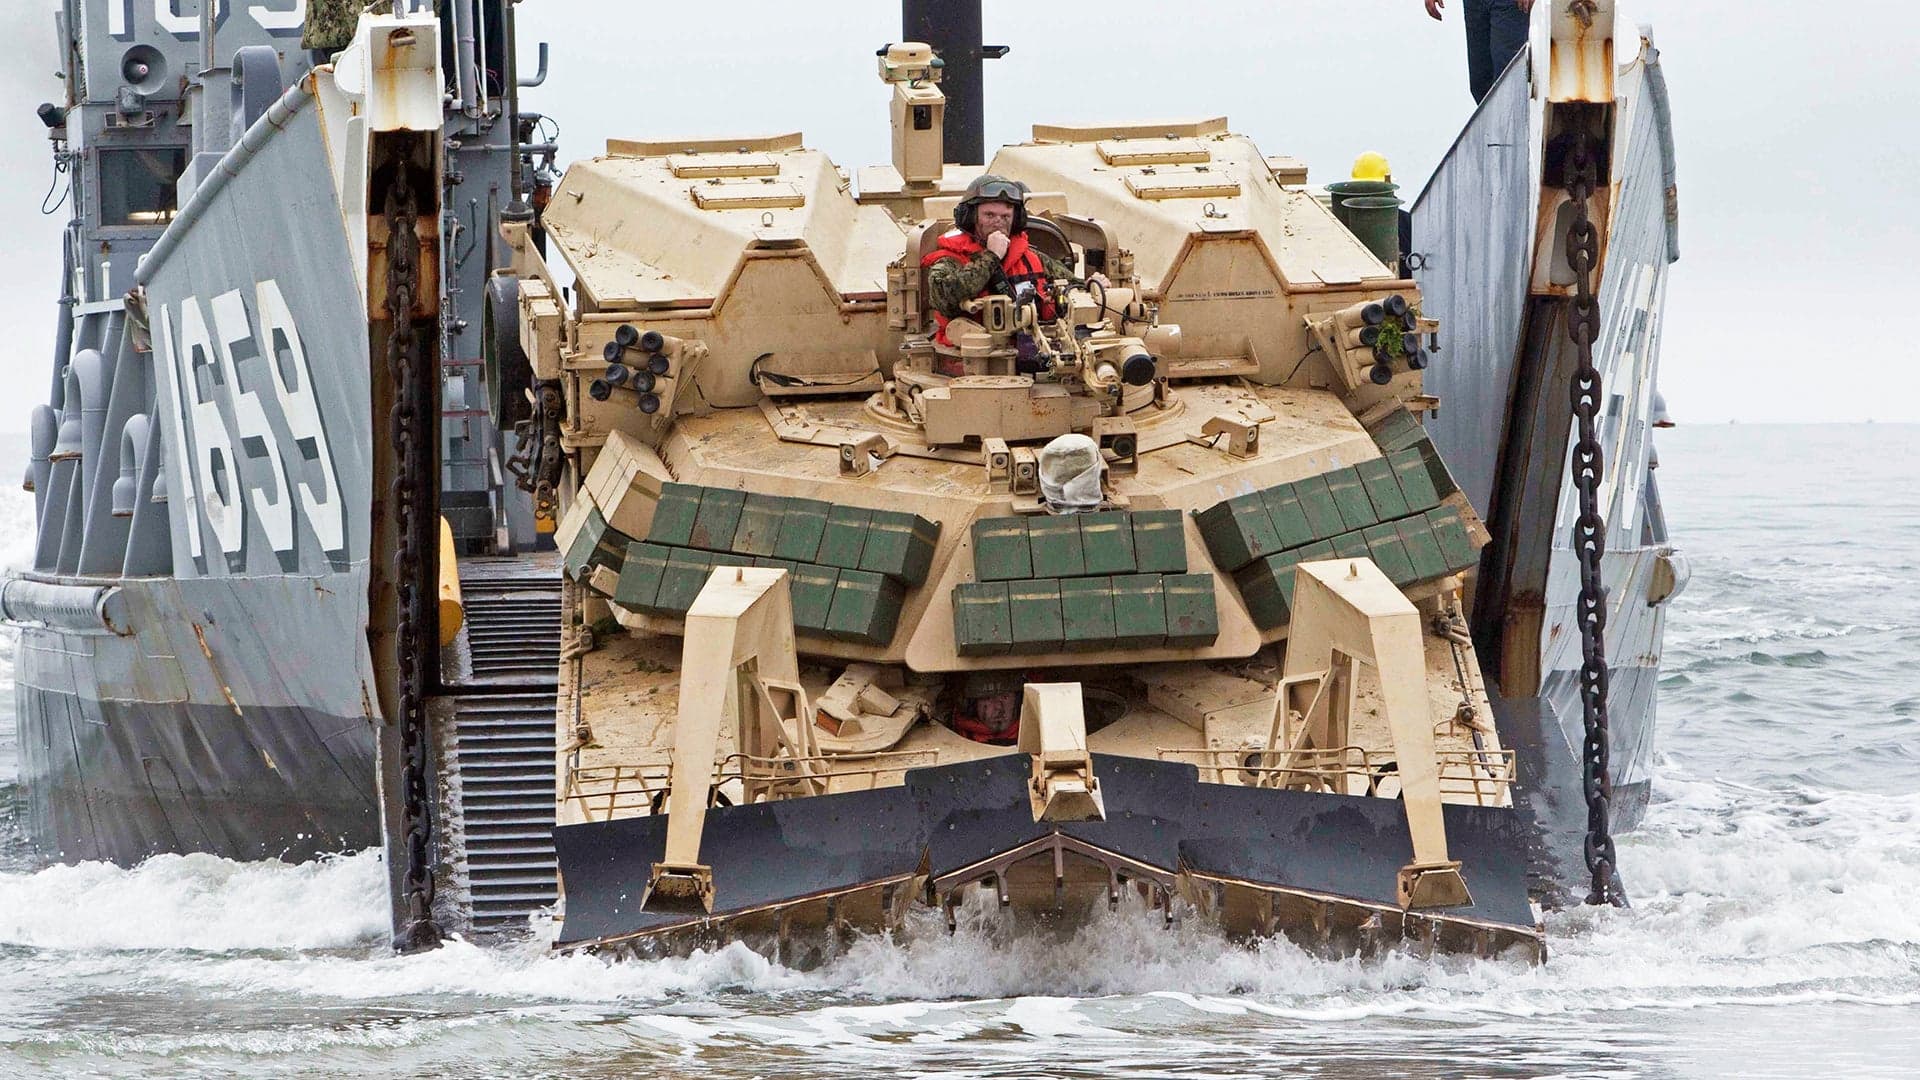 The Marines’ Most Wicked Looking Armored Vehicle Looks Even Scarier Making A Beach Landing